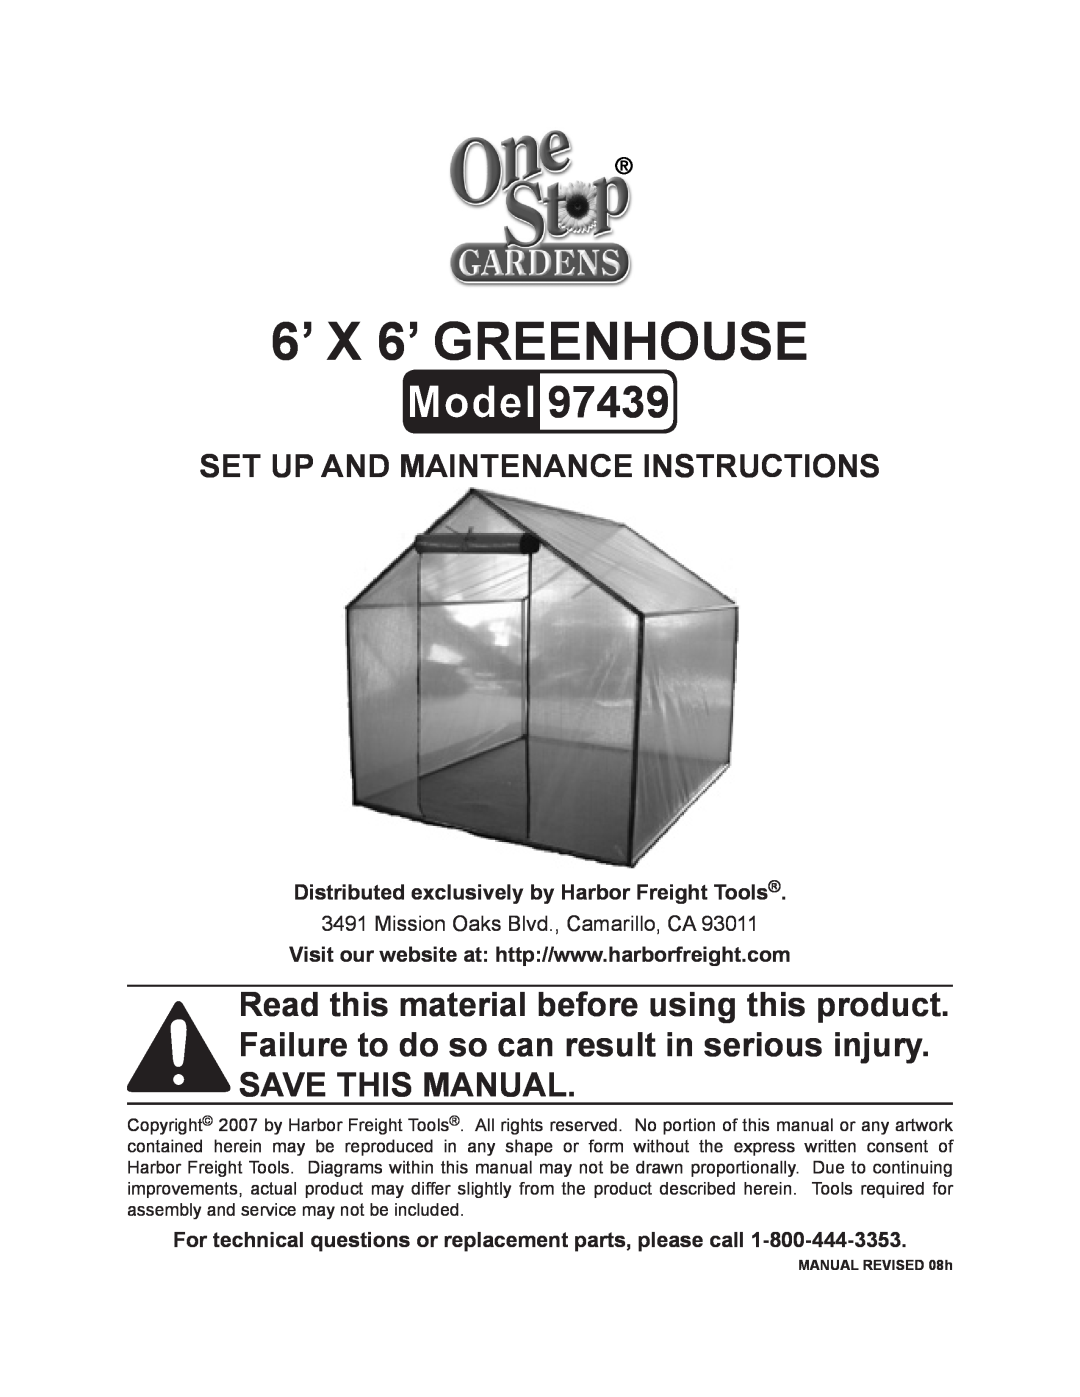 Harbor Freight Tools 97439 manual Distributed exclusively by Harbor Freight Tools, 6’ x 6’ Greenhouse 